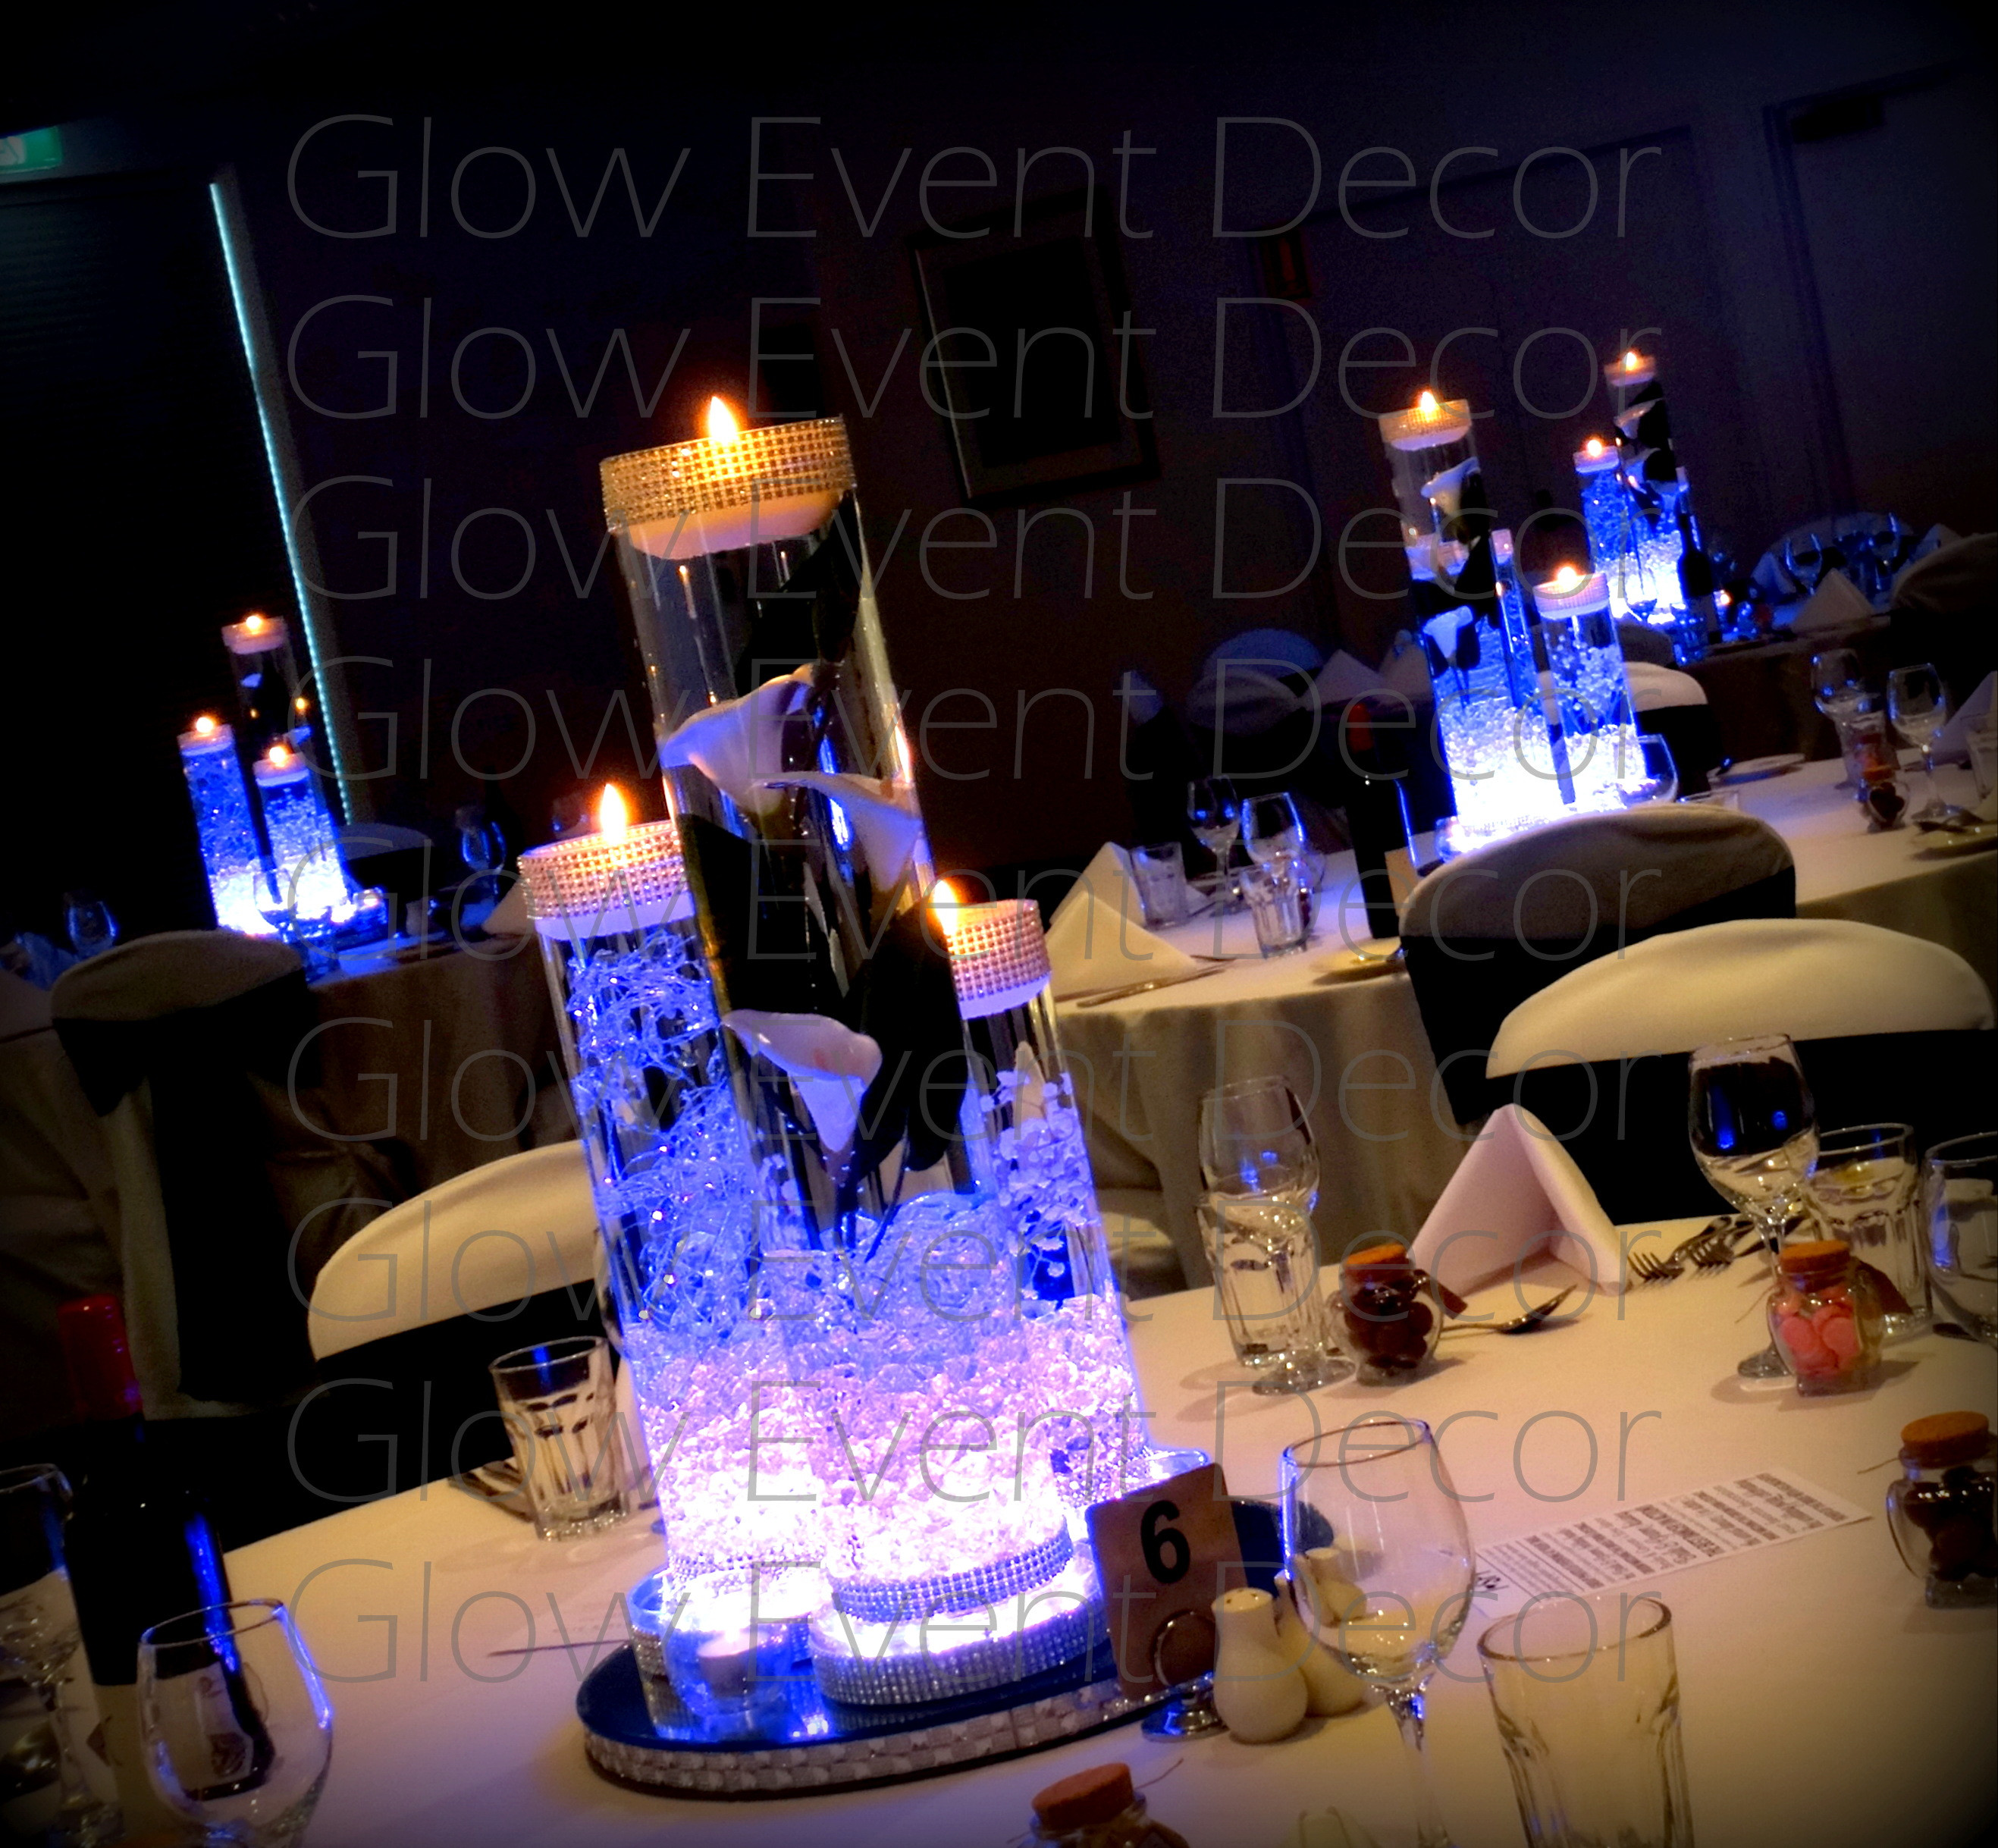 10 Fantastic Light Up Vases Weddings 2024 free download light up vases weddings of led orchid cylinder vase glow event decor intended for cylinder vase trio with led light bases and floating candles for hire glow event decor adelaide